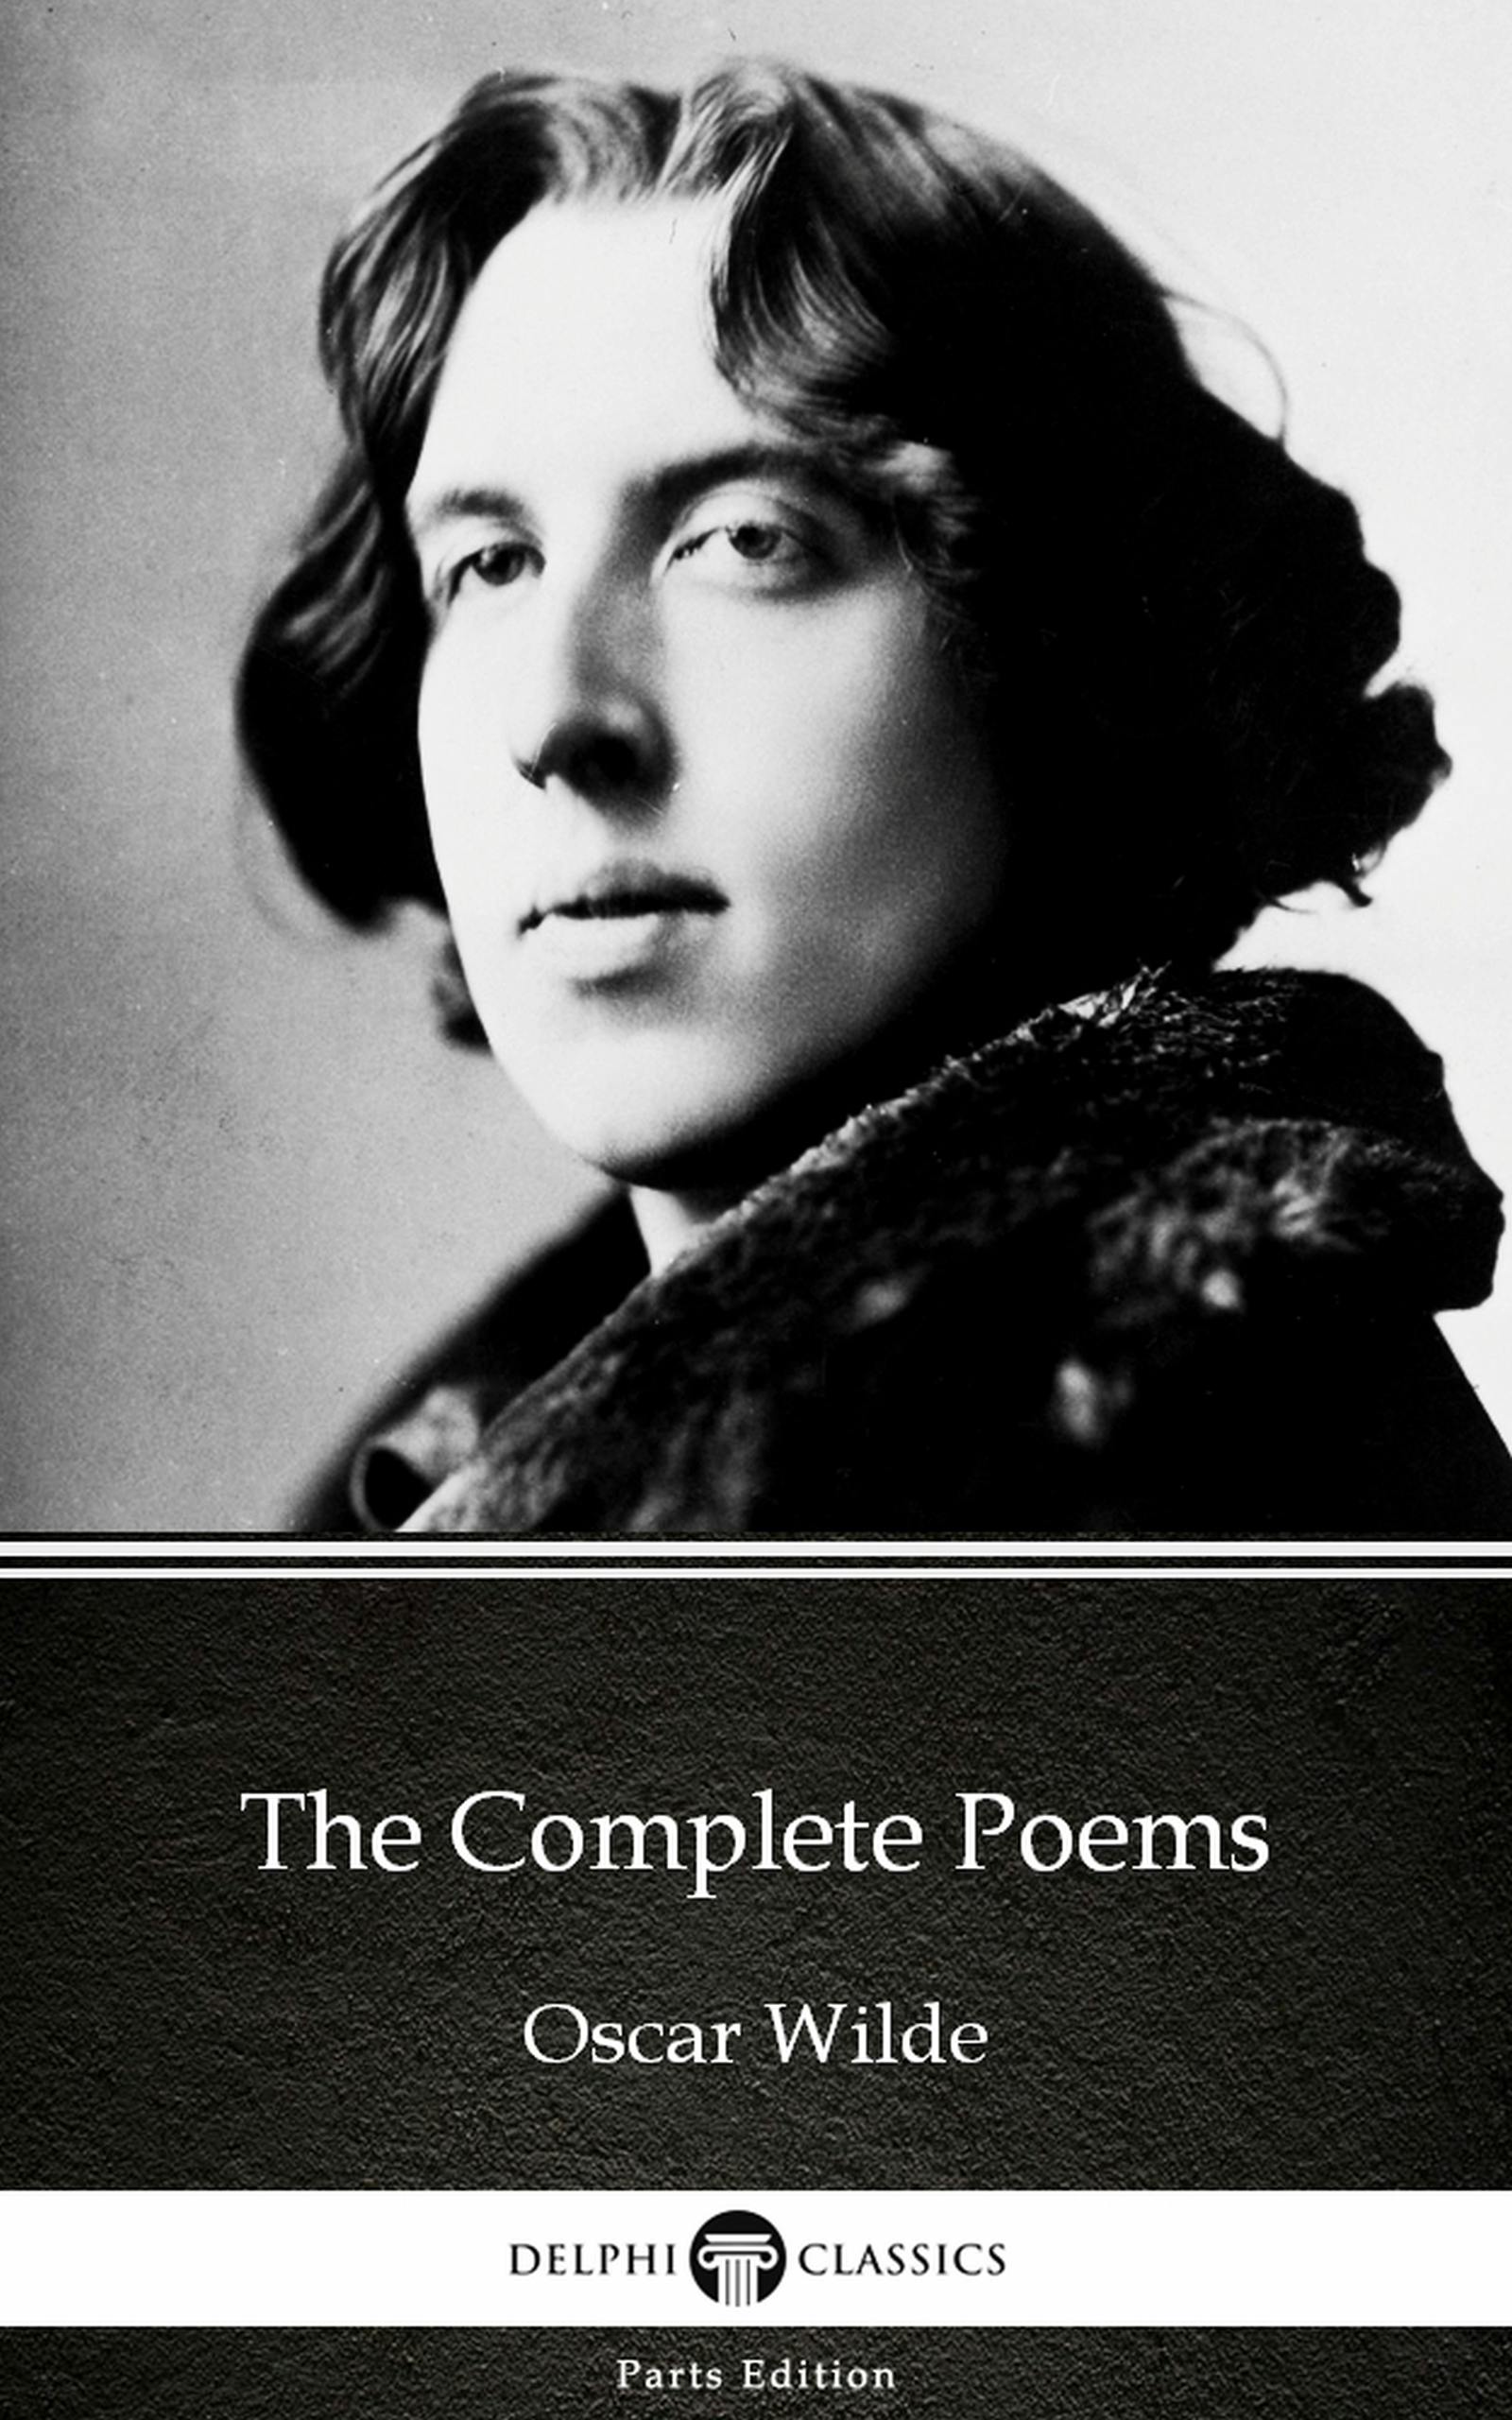 The Complete Poems by Oscar Wilde (Illustrated) - Oscar Wilde